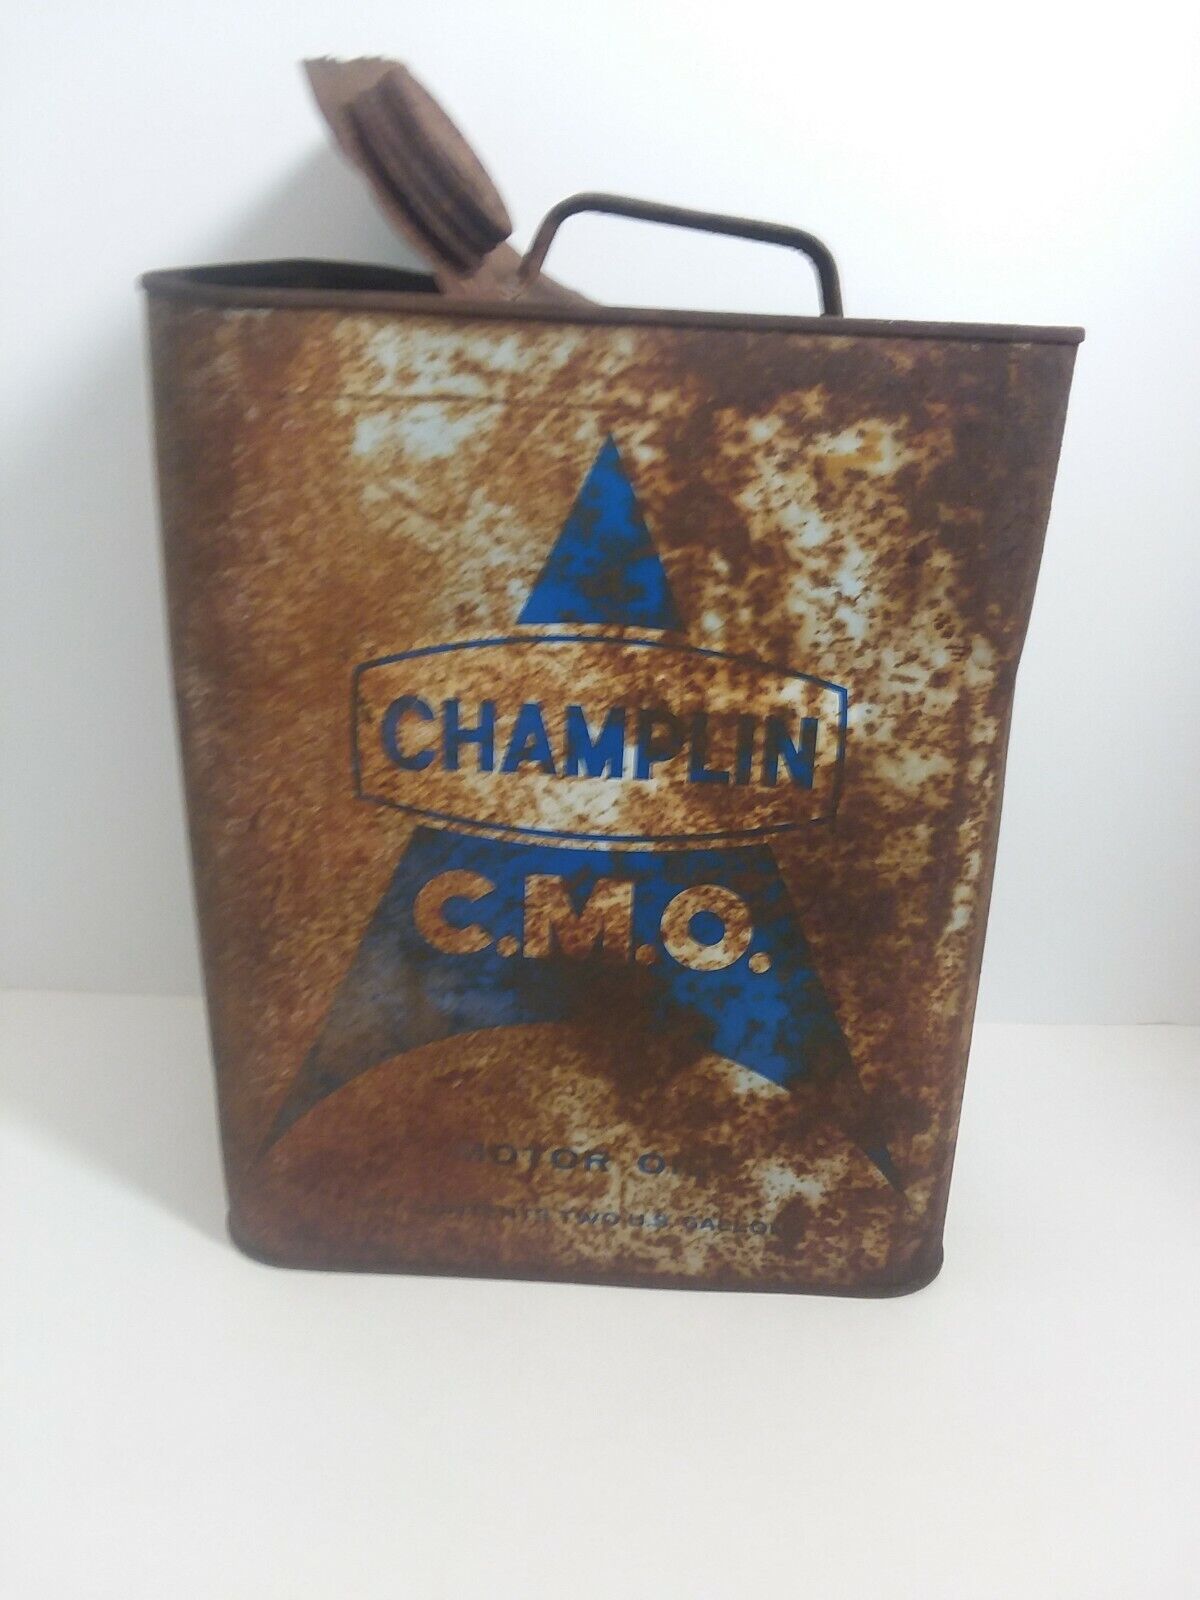 Vtg Champlin Two Gallon Motor Oil Can rusty dirty found in junk pile in Mn 